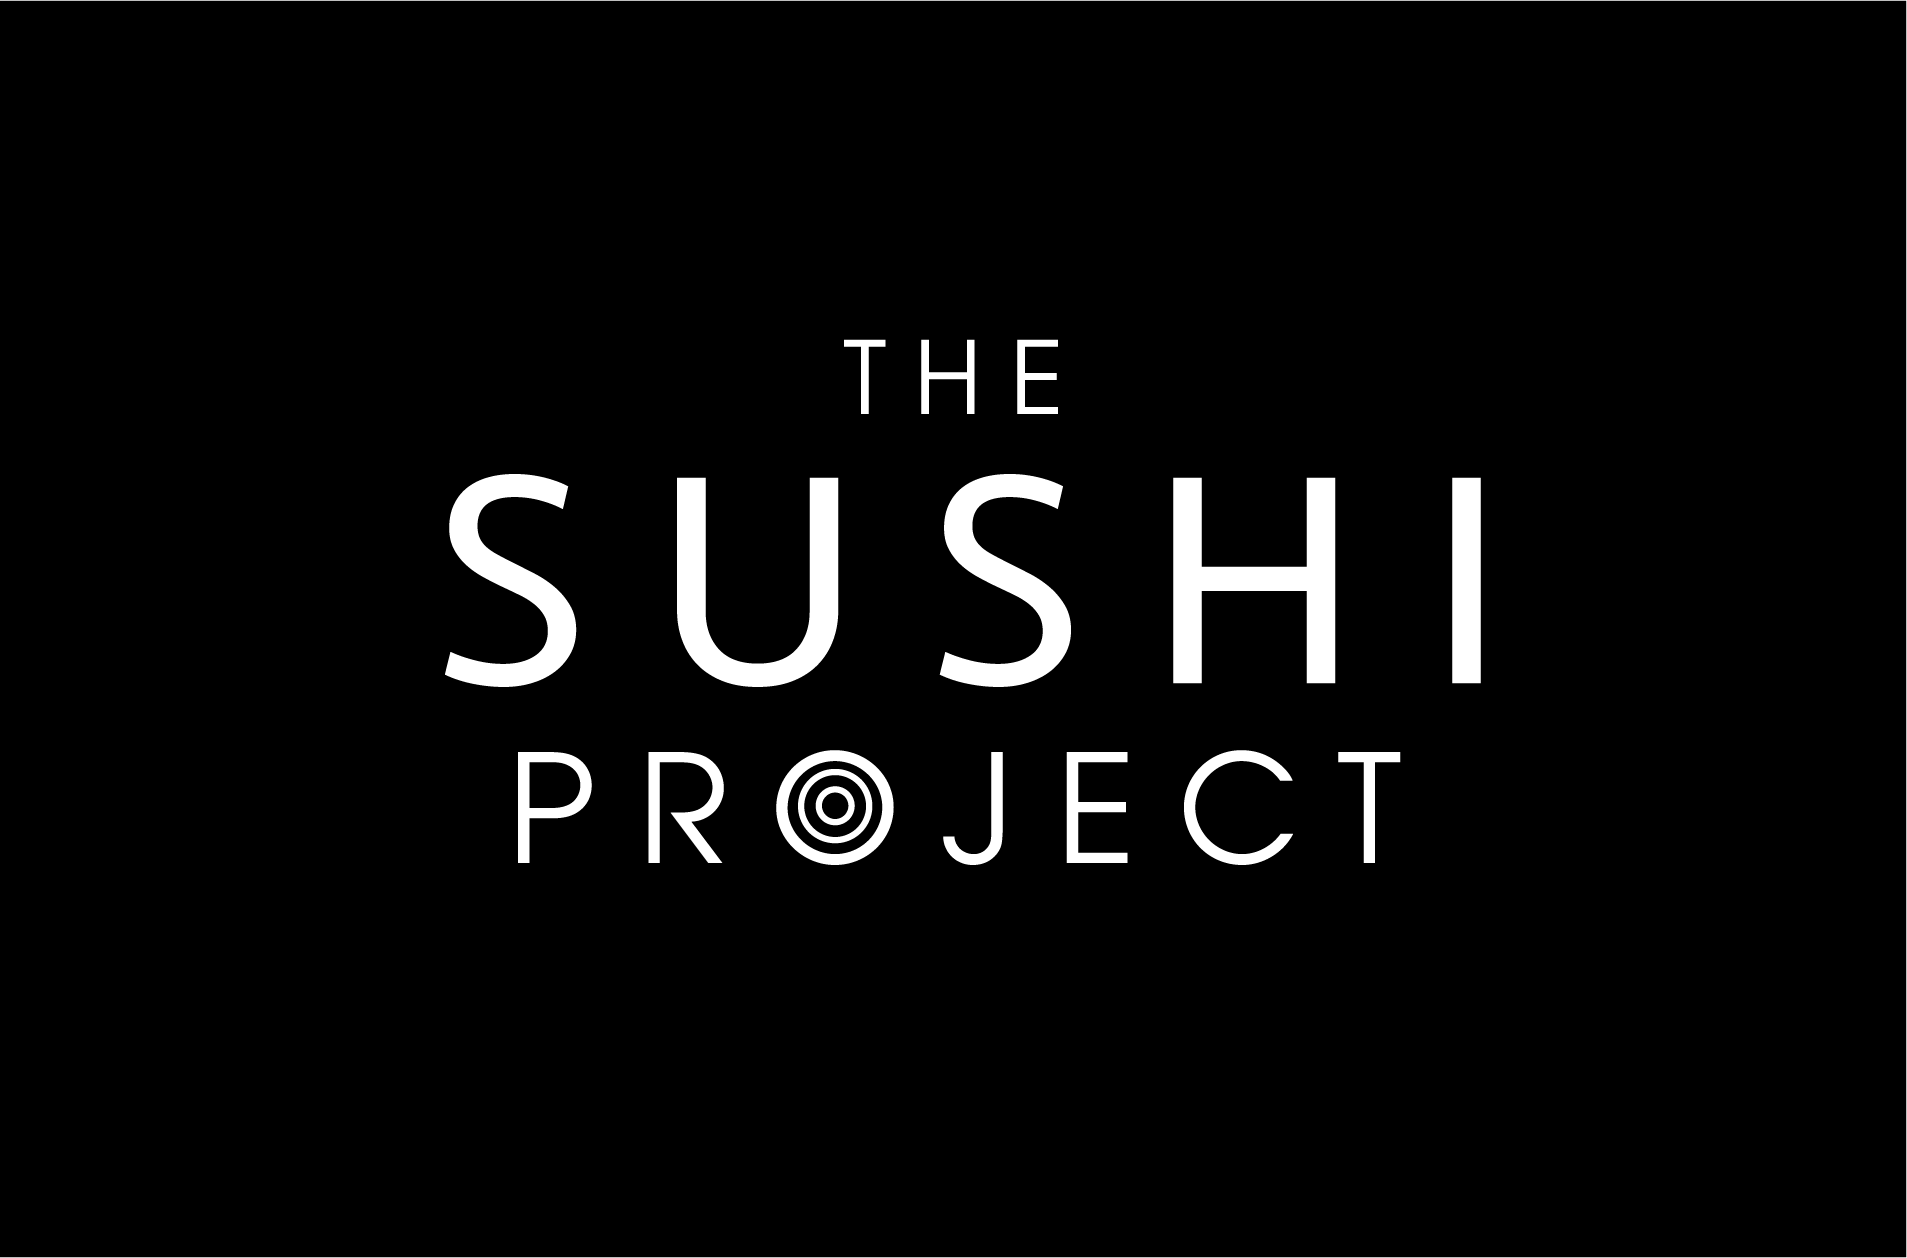 The Sushi Project